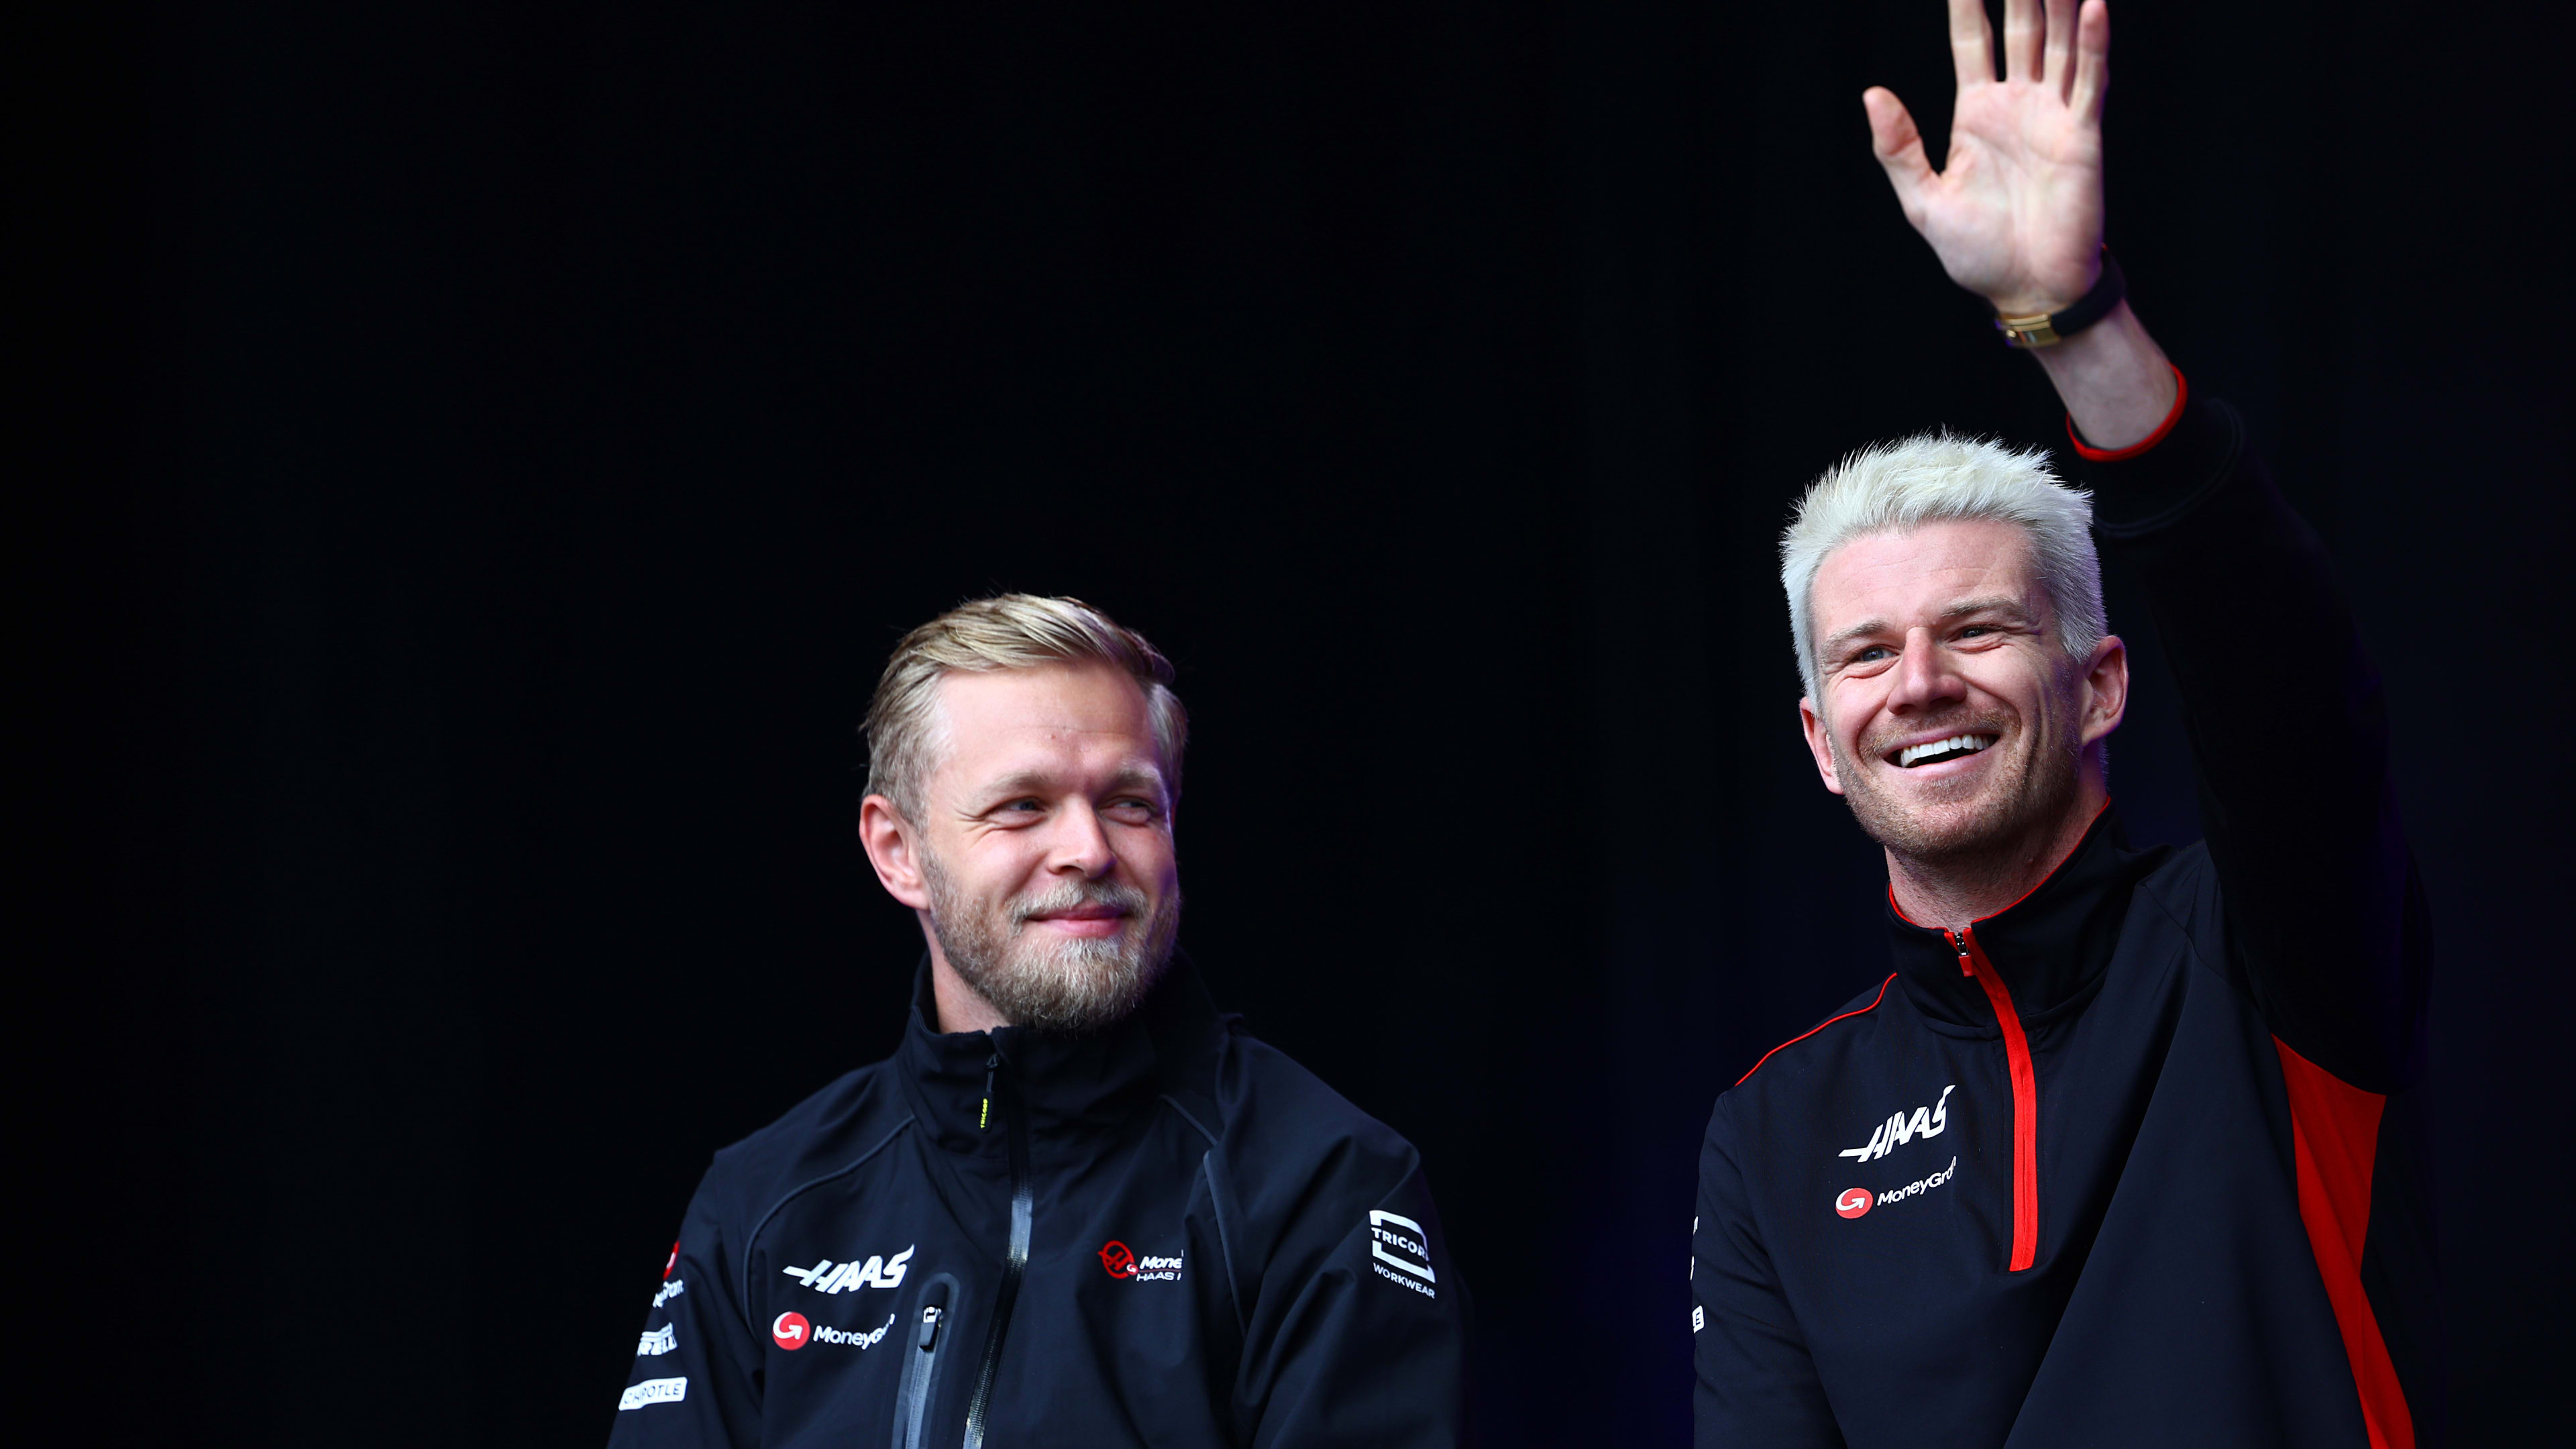 SPA, BELGIUM - JULY 29: Kevin Magnussen of Denmark and Haas F1 and Nico Hulkenberg of Germany and